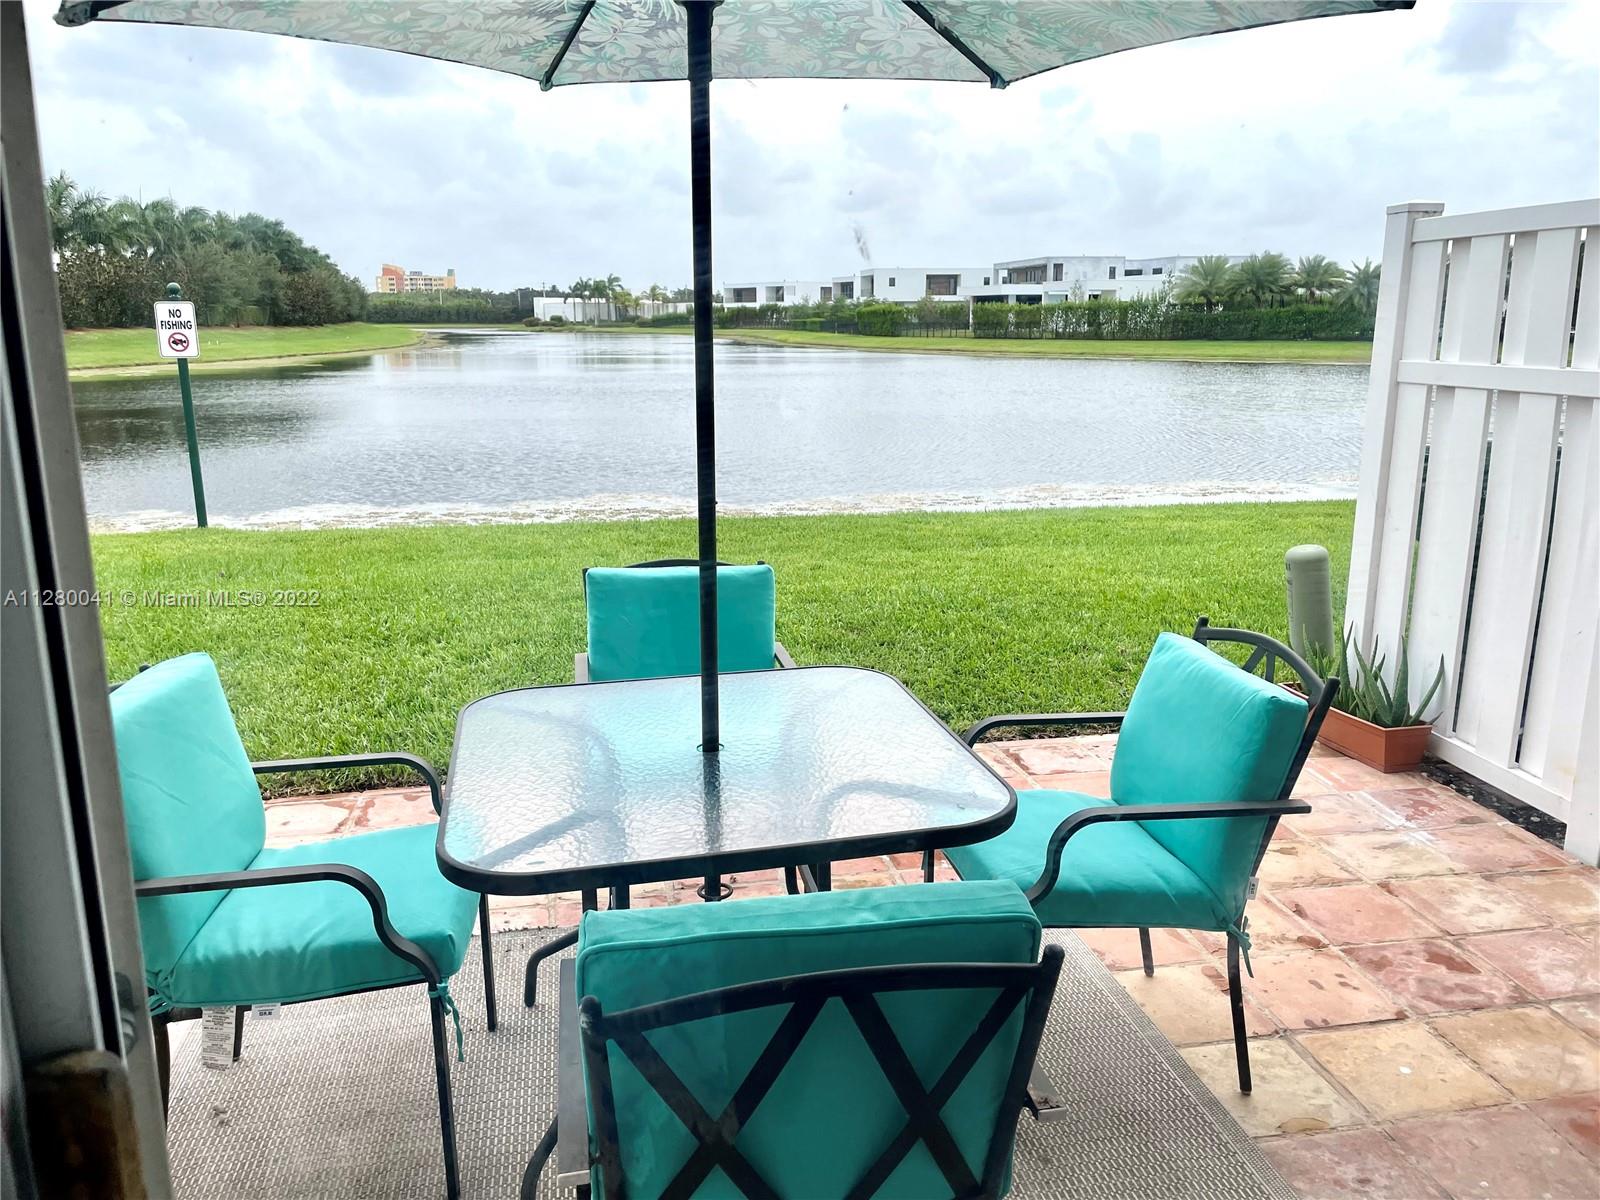 THIS REMODEL TOWNHOME WITH A SPECTACULAR LAKE VIEW HAS 3 BEDROOMS, 2 FULL BATHS AND 1 HALF BATH, HAS A GREAT LAYOUT WITH TILE AND LAMINATE FLOORS, IS MINUTES AWAY FROM SAWGRASS MILLS MALL, NEARBY BB&T CENTER AND HIGHWAYS. GREAT PUBLIC AND PRIVATE SCHOOLS, NO RENTAL RESTRICTIONS, HOA $214.- RIVIERA AT WESTON IS ON THE CORNER OF BONAVENTURE BLVD AND RACKET CLUB RD.